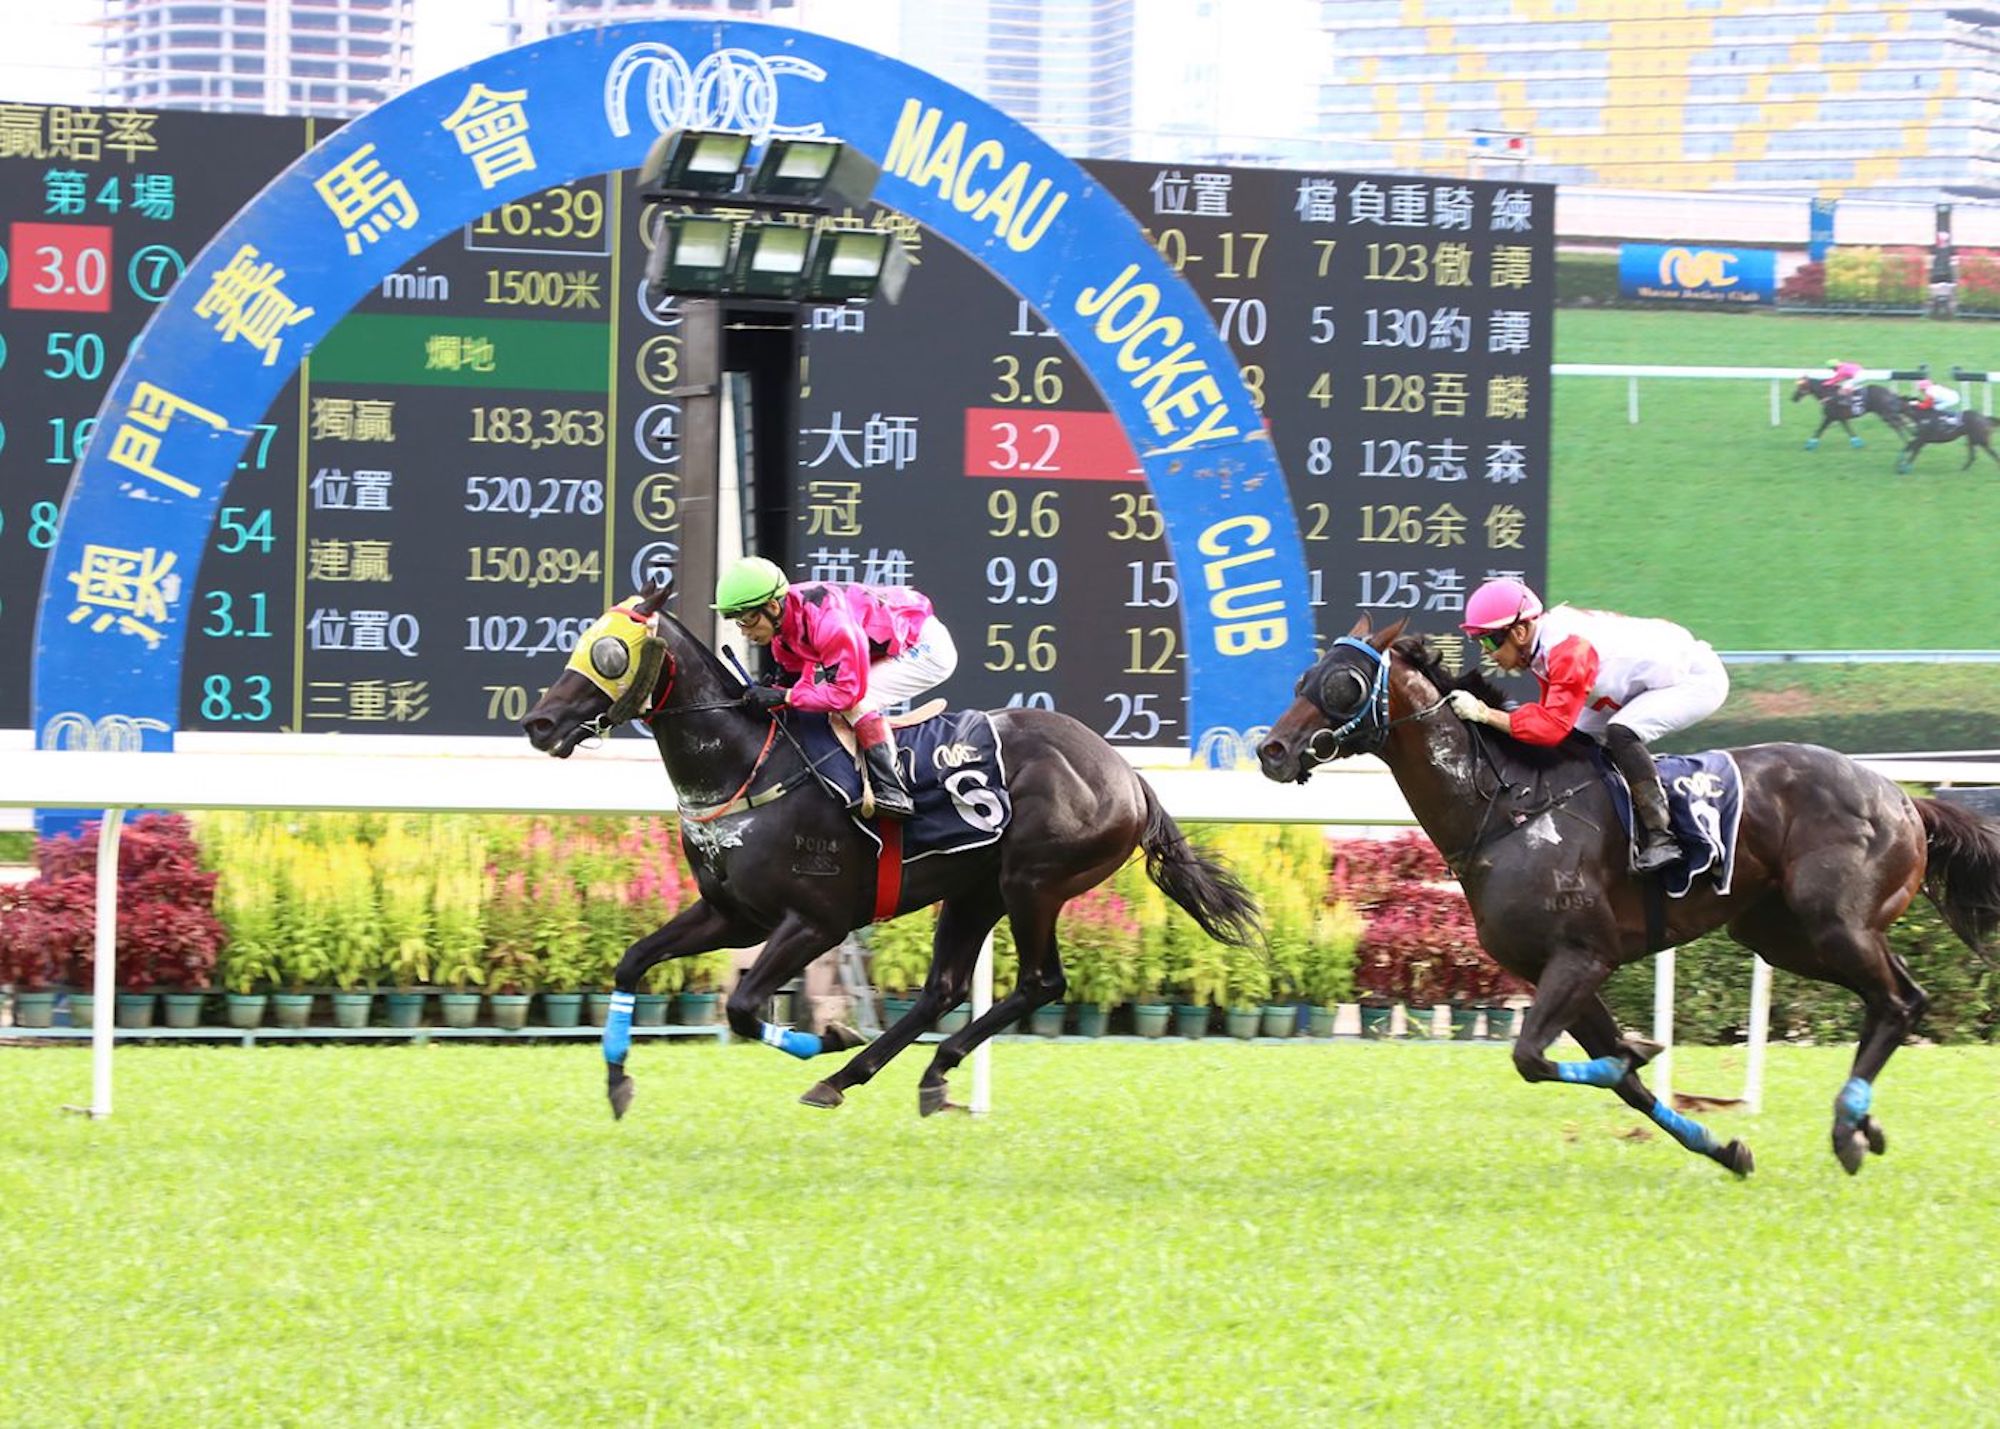 MJC has averted a strike by jockeys and trainers